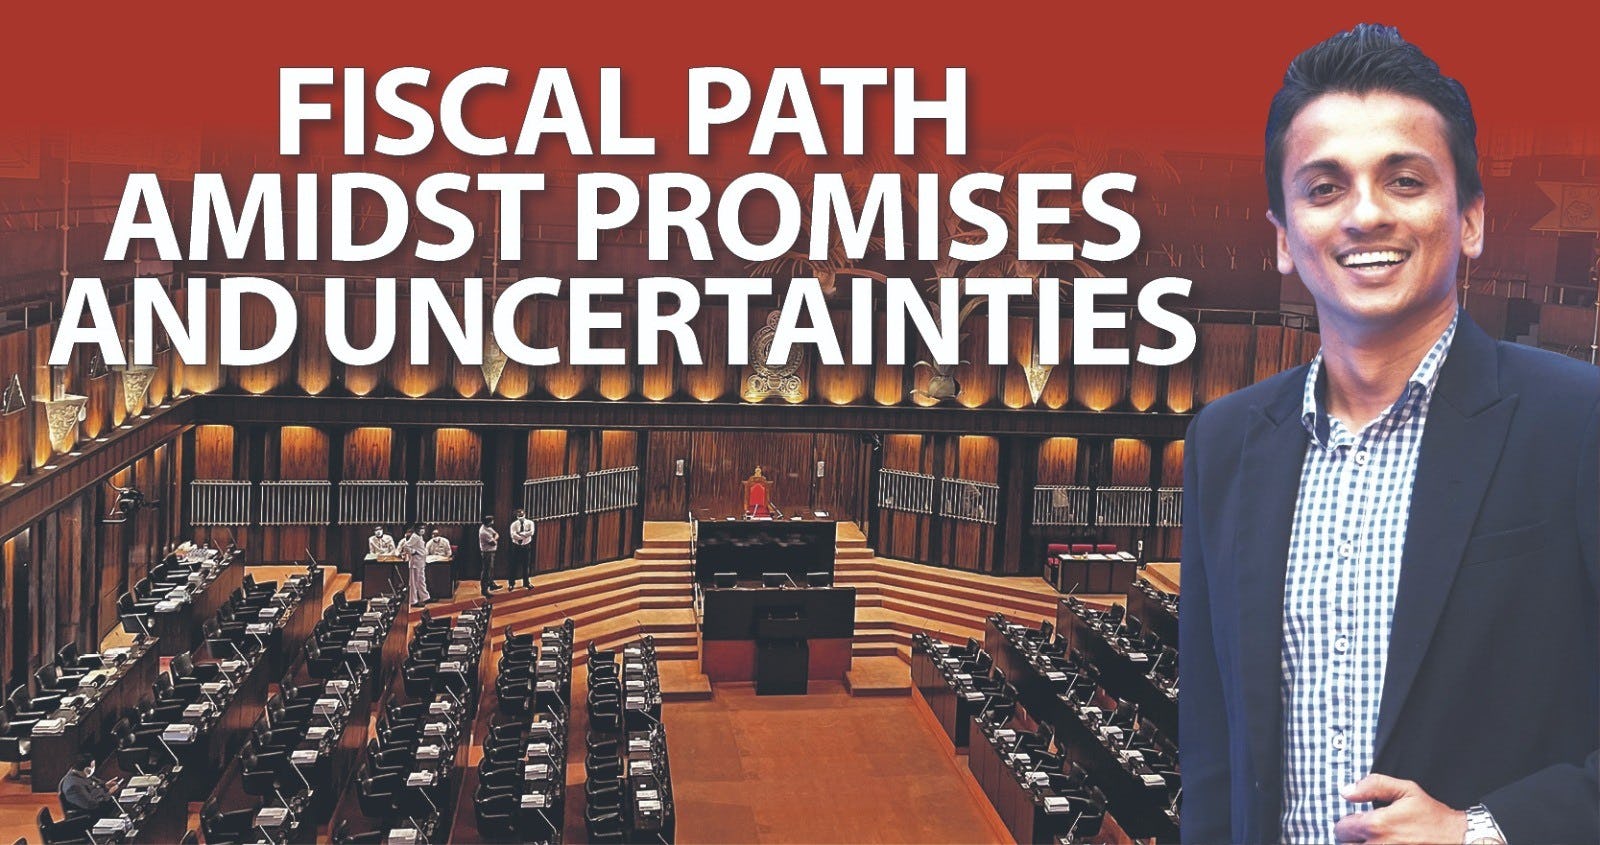 Fiscal path amidst promises and uncertainties 